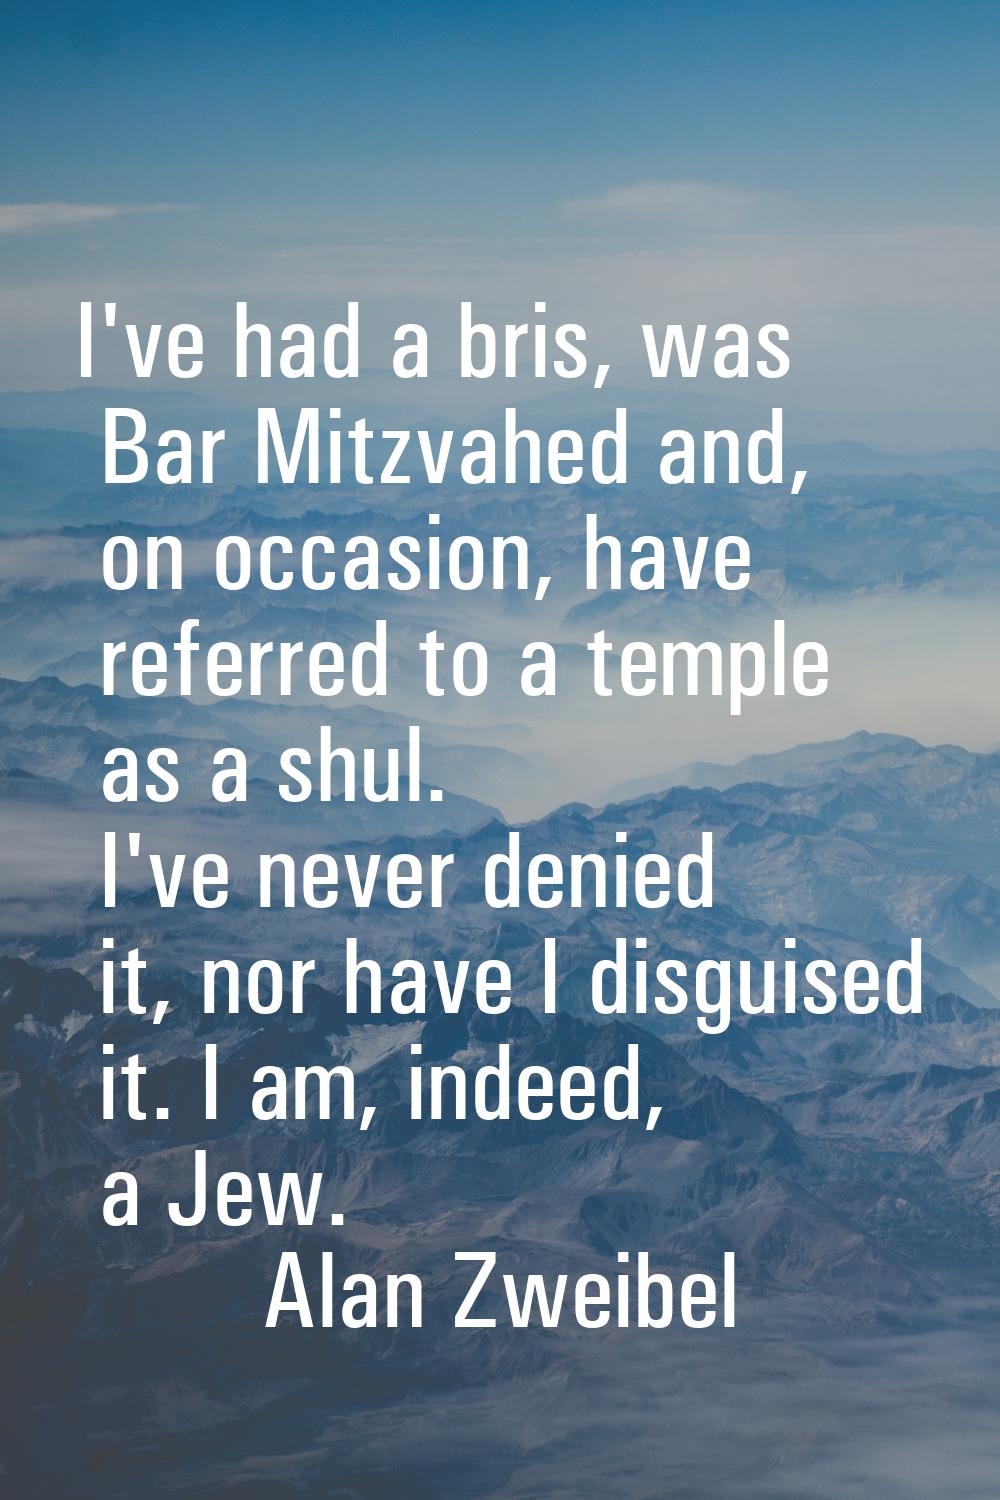 I've had a bris, was Bar Mitzvahed and, on occasion, have referred to a temple as a shul. I've neve